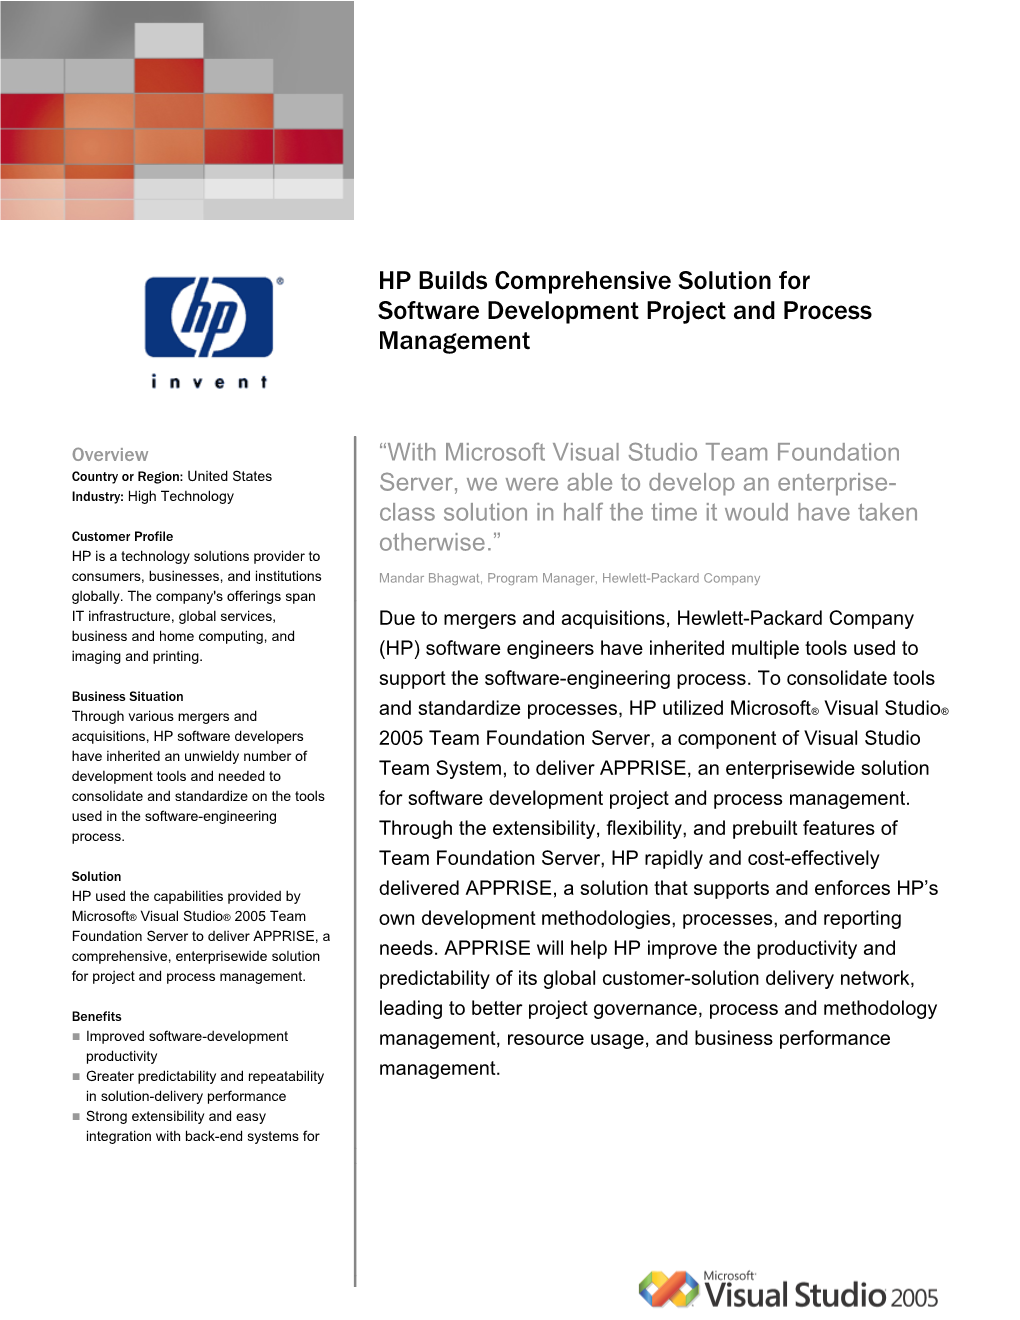 HP Builds Comprehensive Solution for Software Development Project and Process Management